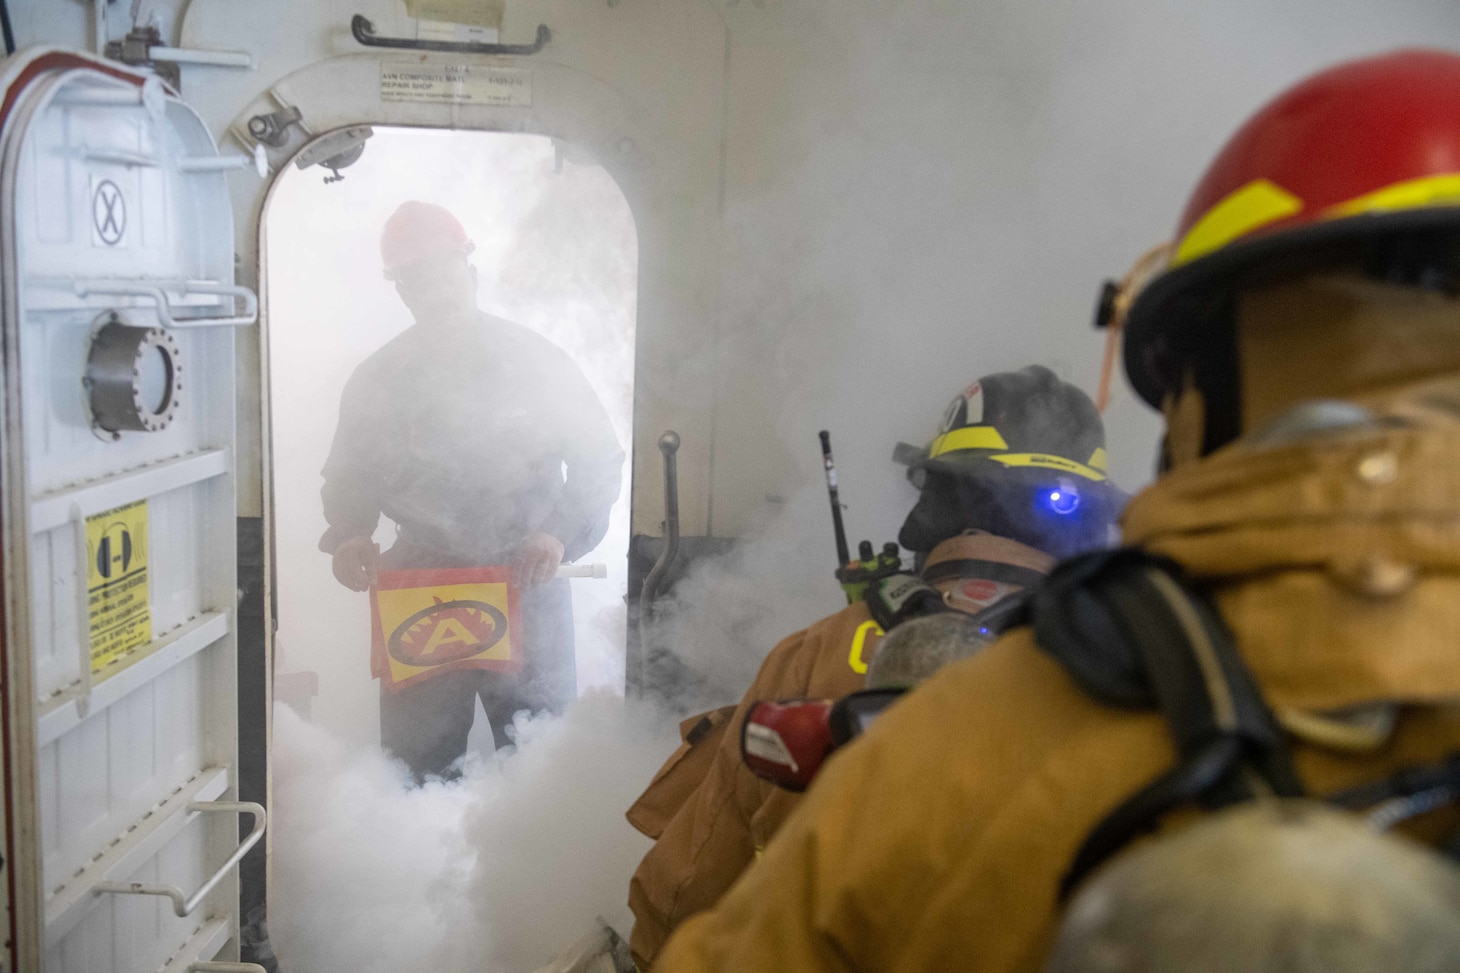 Sailors assigned to the forward-deployed amphibious assault ship USS America (LHA 6) engage a simulated fire in the ship’s hangar bay during an integrated industrial firefighting drill with Commander, Naval Region Japan Fire & Emergency Services firefighters onboard U.S. Fleet Activities Sasebo, April 27. The drill, required by the Industrial Ship Safety Manual for Fire Prevention (8010), was created to train integrated teams of Sailors and base firefighters to casualties in industrial environments. America, lead ship of the America Amphibious Ready Group, is operating in the U.S. 7th Fleet area of responsibility to enhance interoperability with allies and partners and serve as a ready response force to defend peace and stability in the Indo-Pacific region. (U.S. Navy photo by Mass Communication Specialist 3rd Class Matthew Cavenaile)